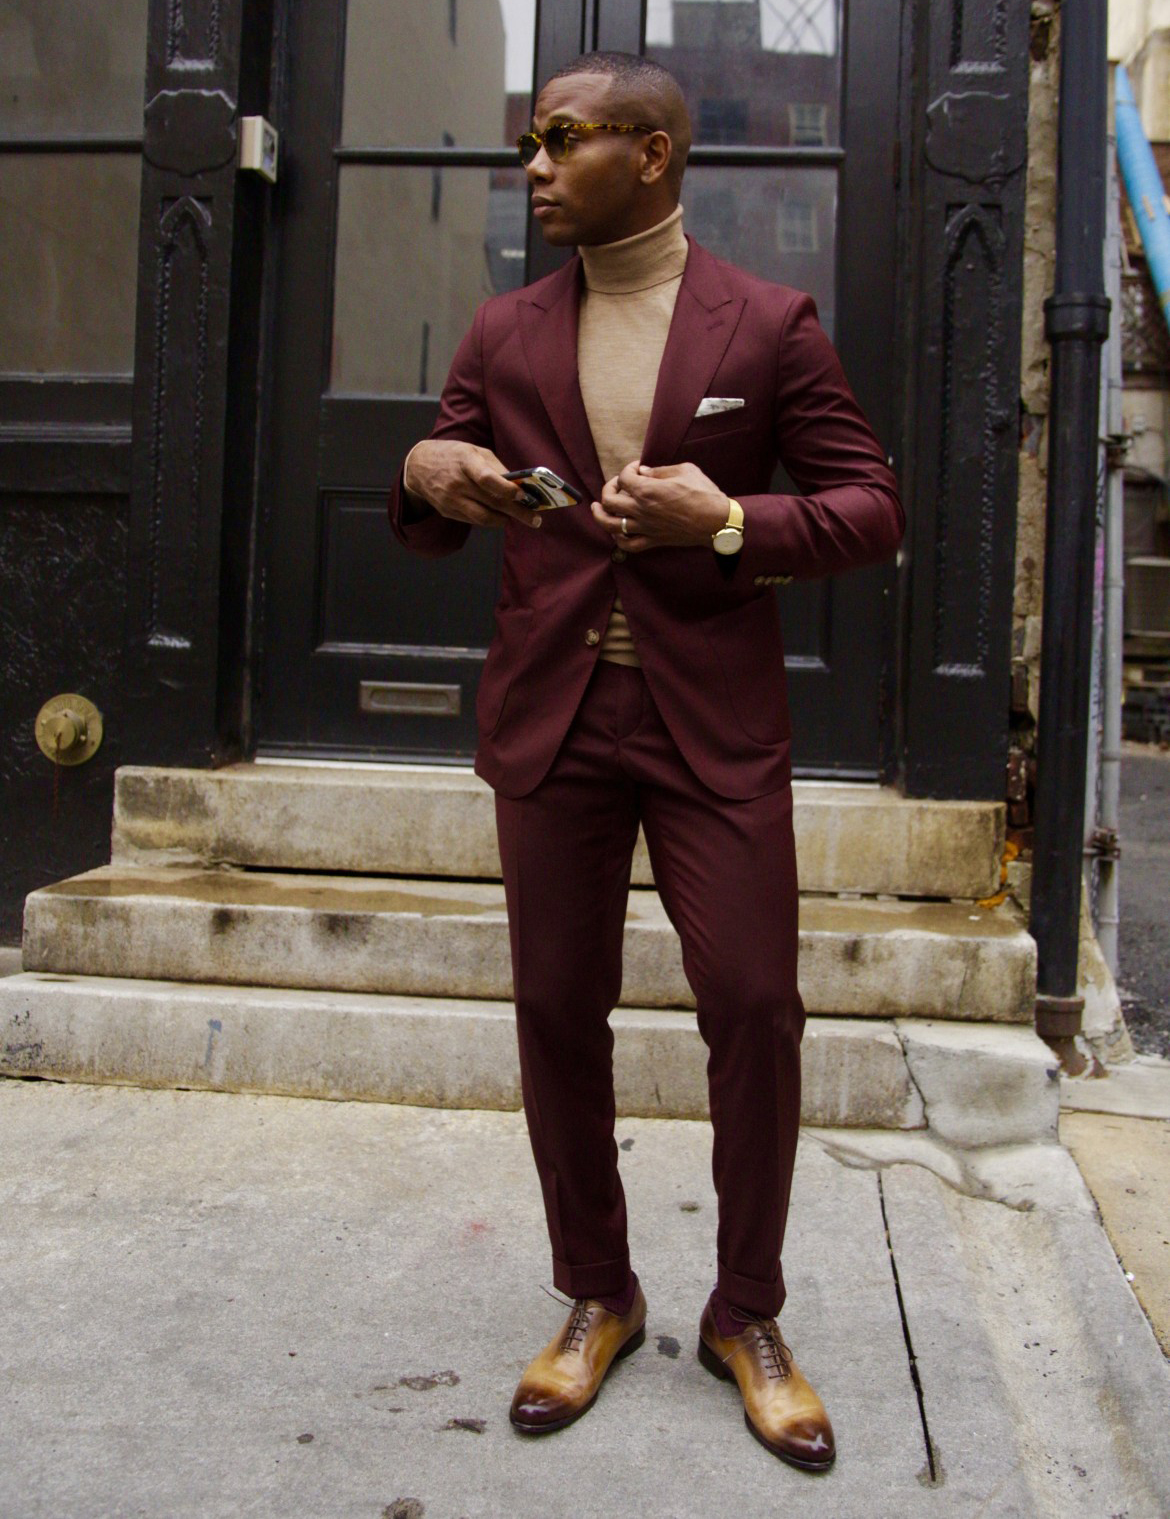 Burgundy suit, tan turtleneck, and brown shoes outfit